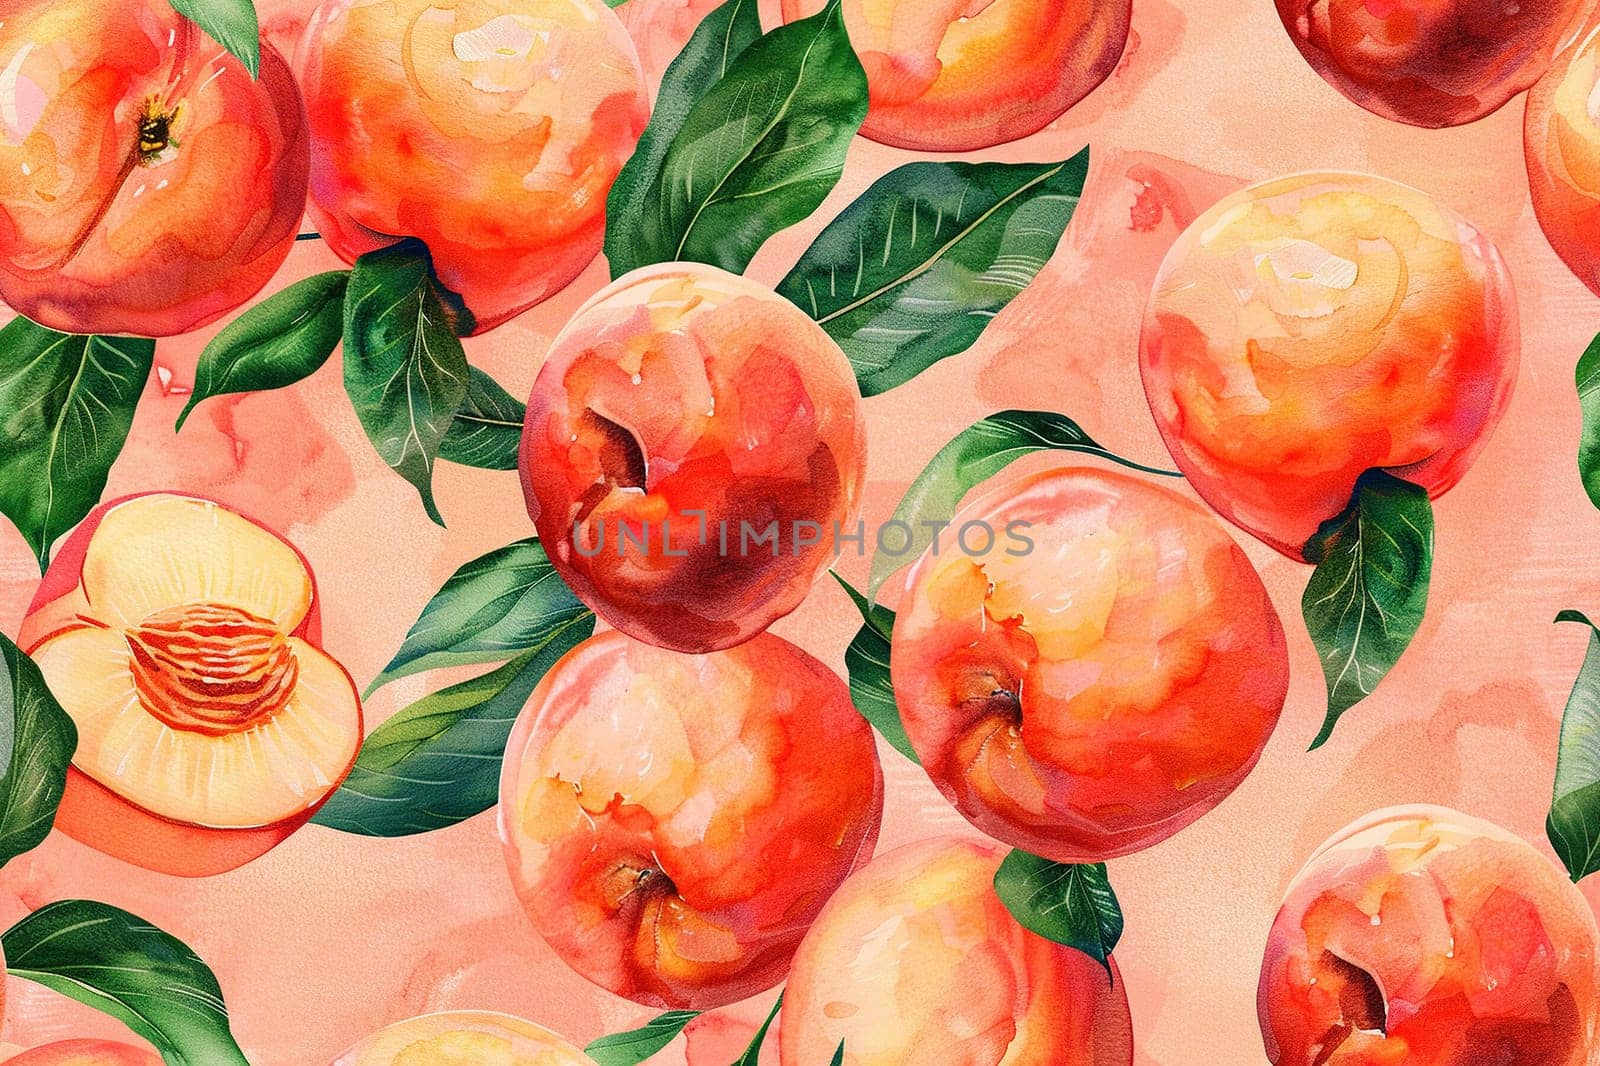 Pattern of peach fruit with green leaf on orange background.